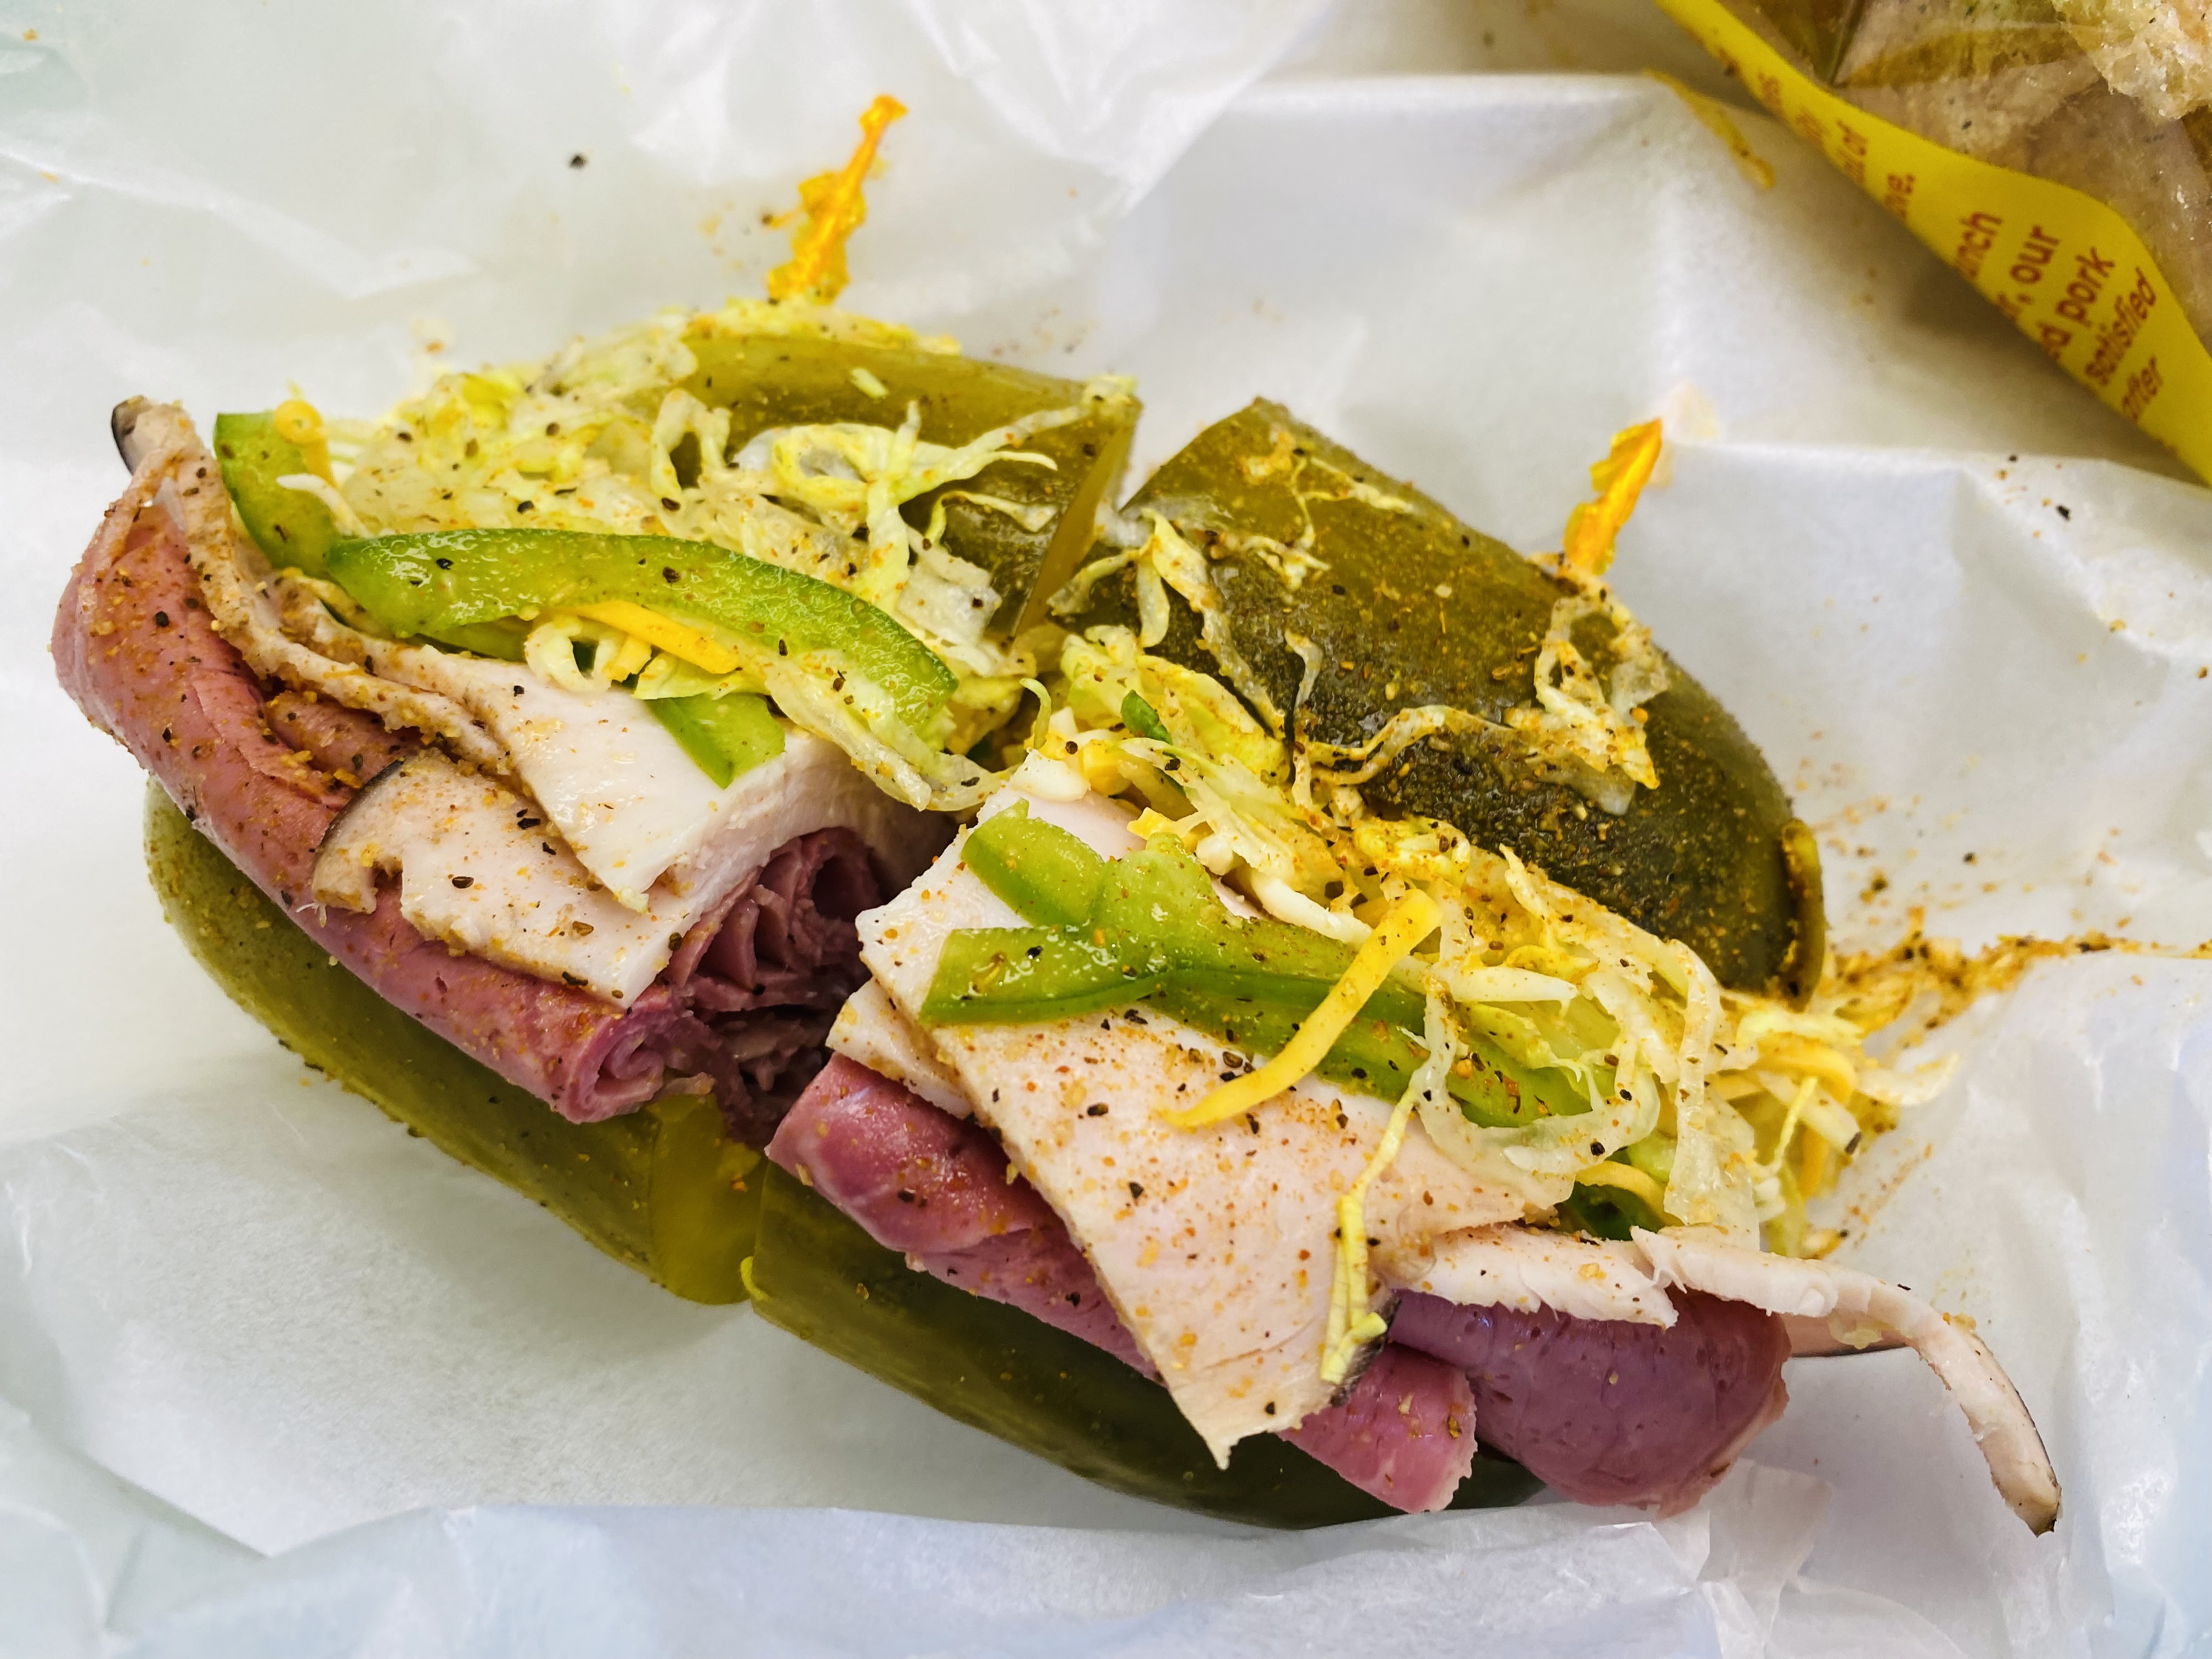 The What’s the Dill sandwich is filled with corned beef, turkey, cheese, bell peppers, lettuce, sweet and spicy mustard, and seasonings at What’s the Dill deli in Detroit, Michigan.